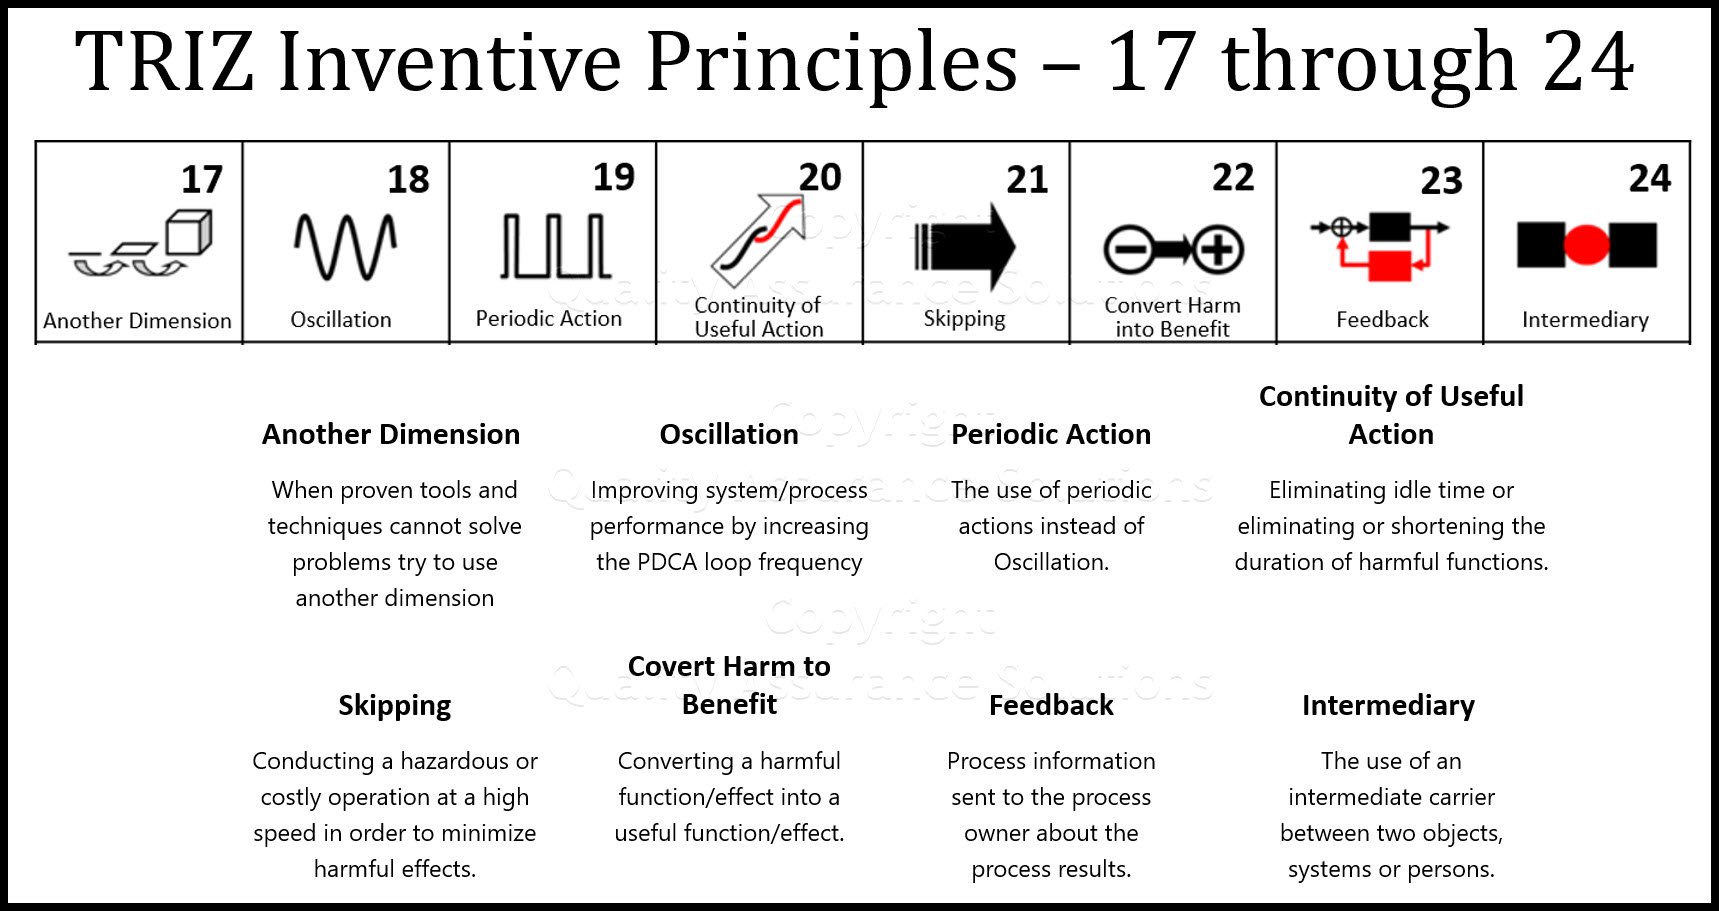 For these Triz inventive Principles, we cover Another Dimension, Mechanical Vibration, Periodic Action, Continuity of Useful Action, Skipping, and Feedback